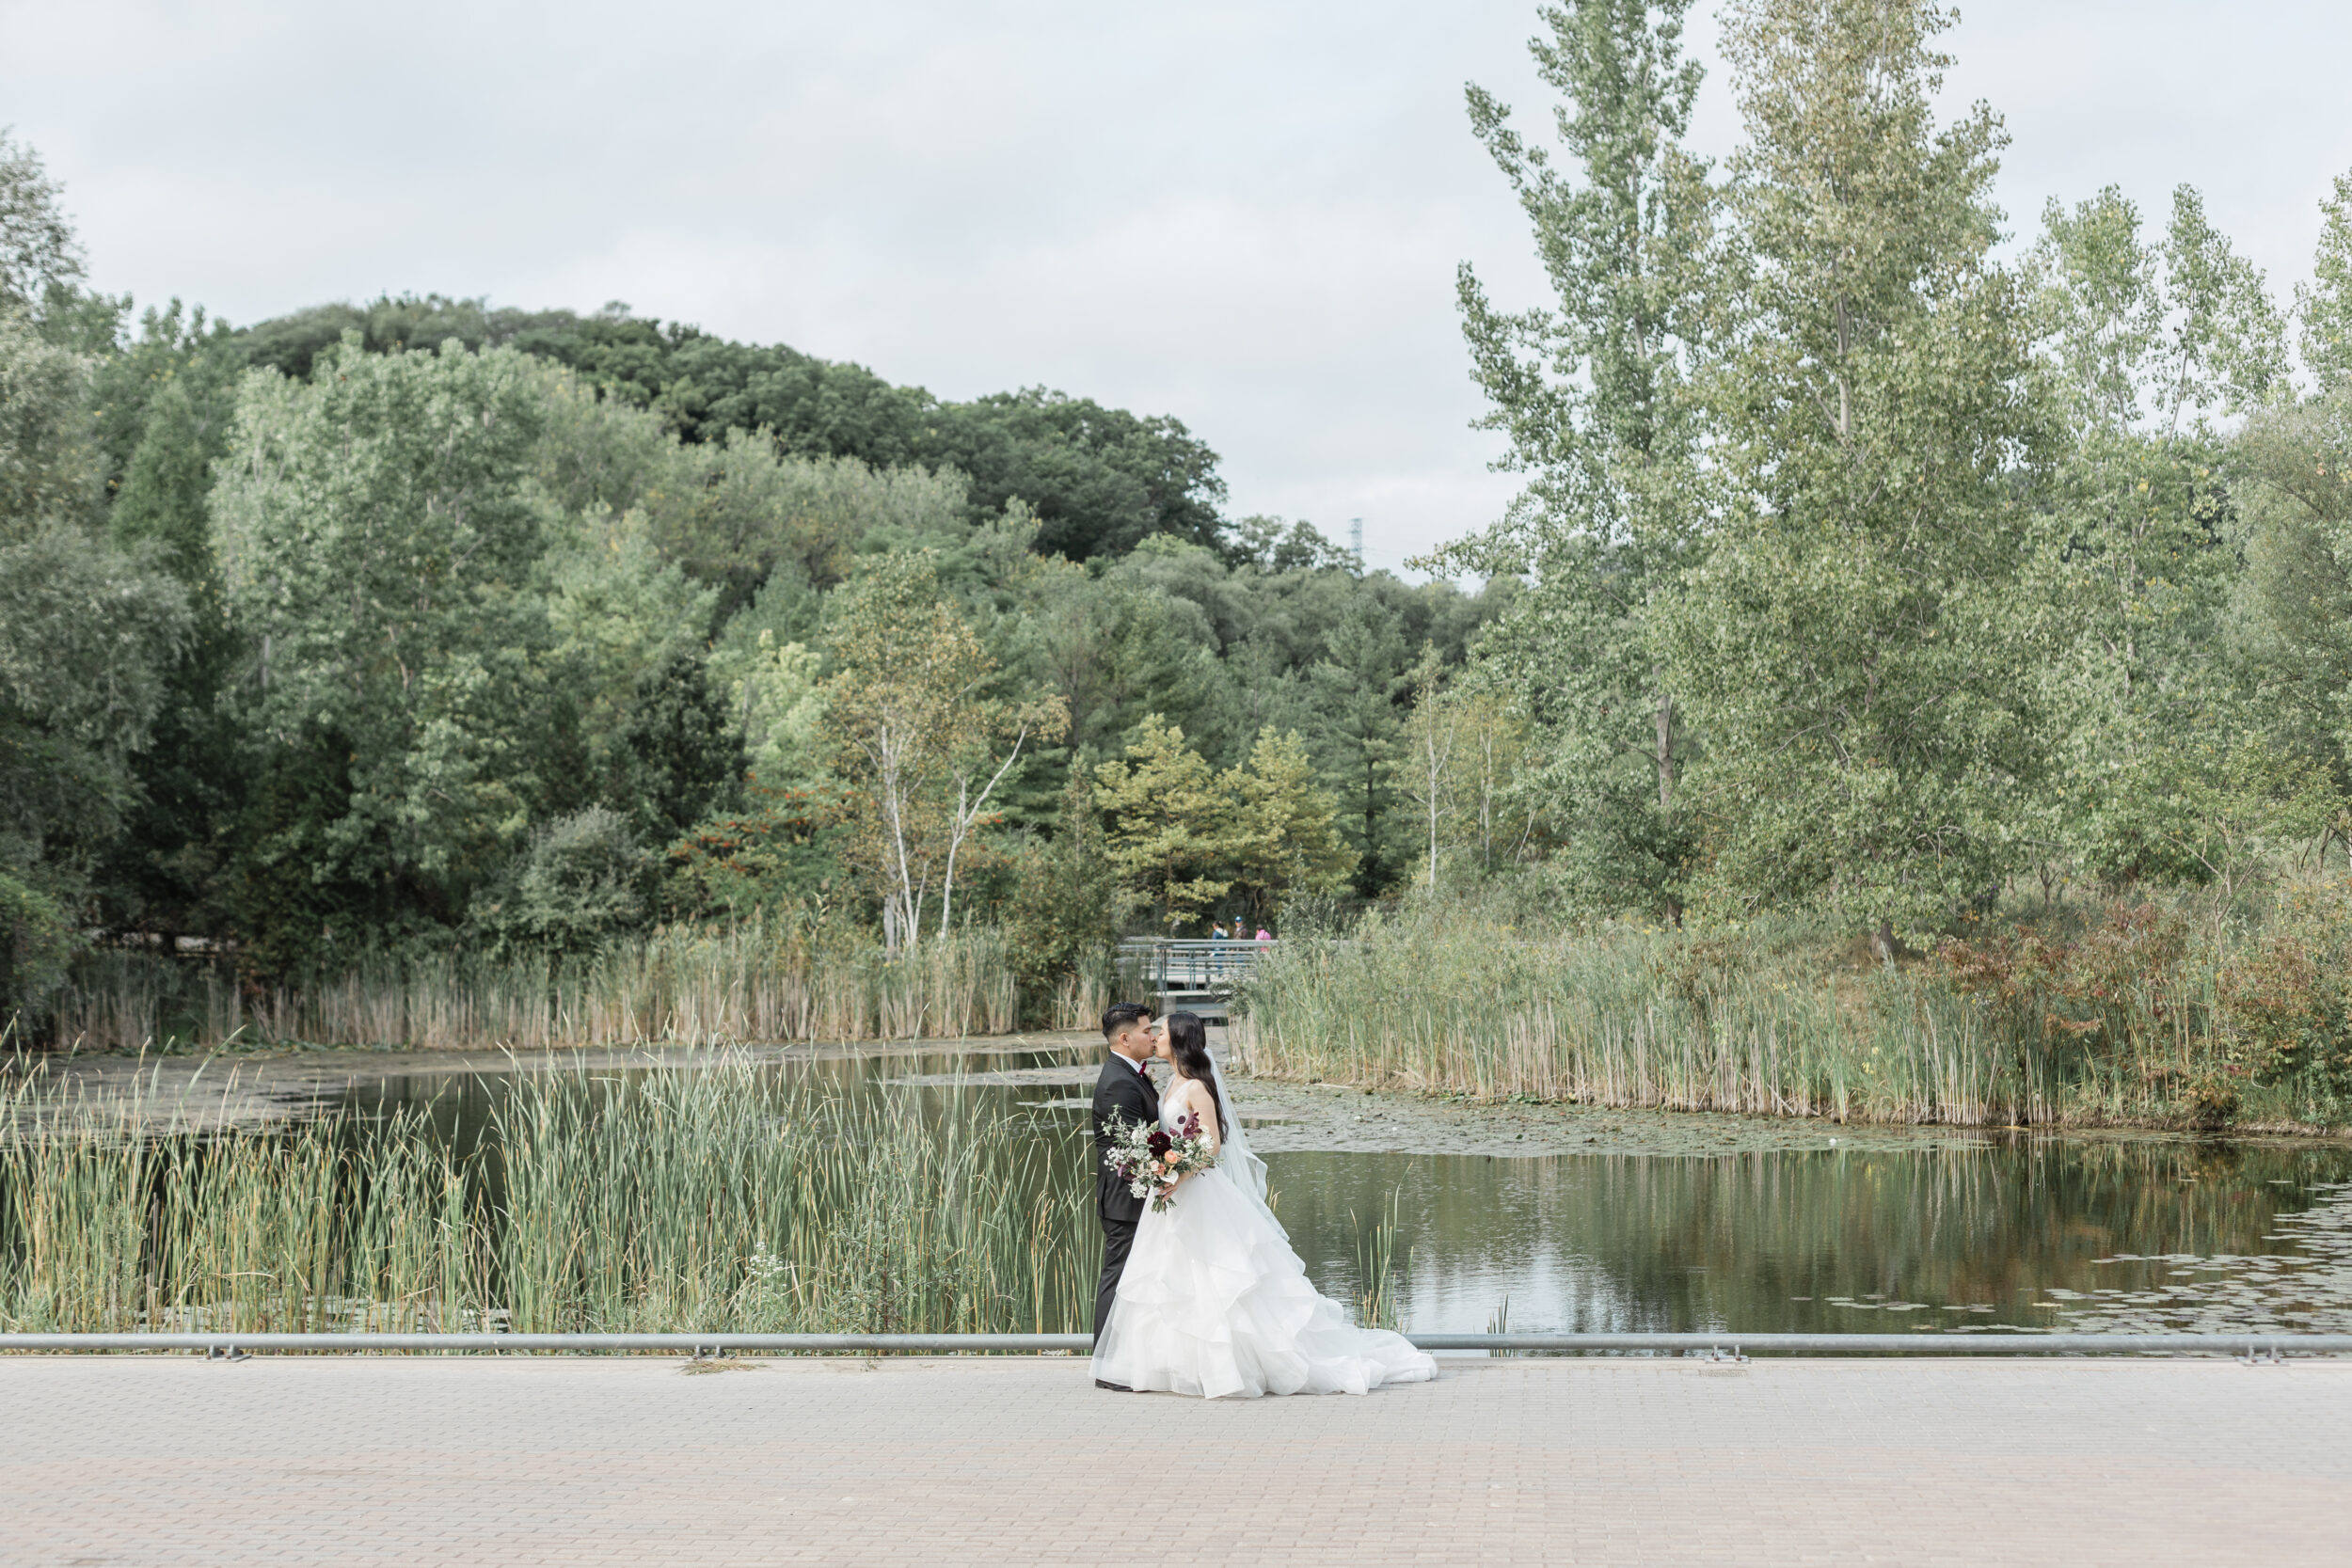 A couple in wedding attire kisses in front of a pond in Toronto during their elopement.